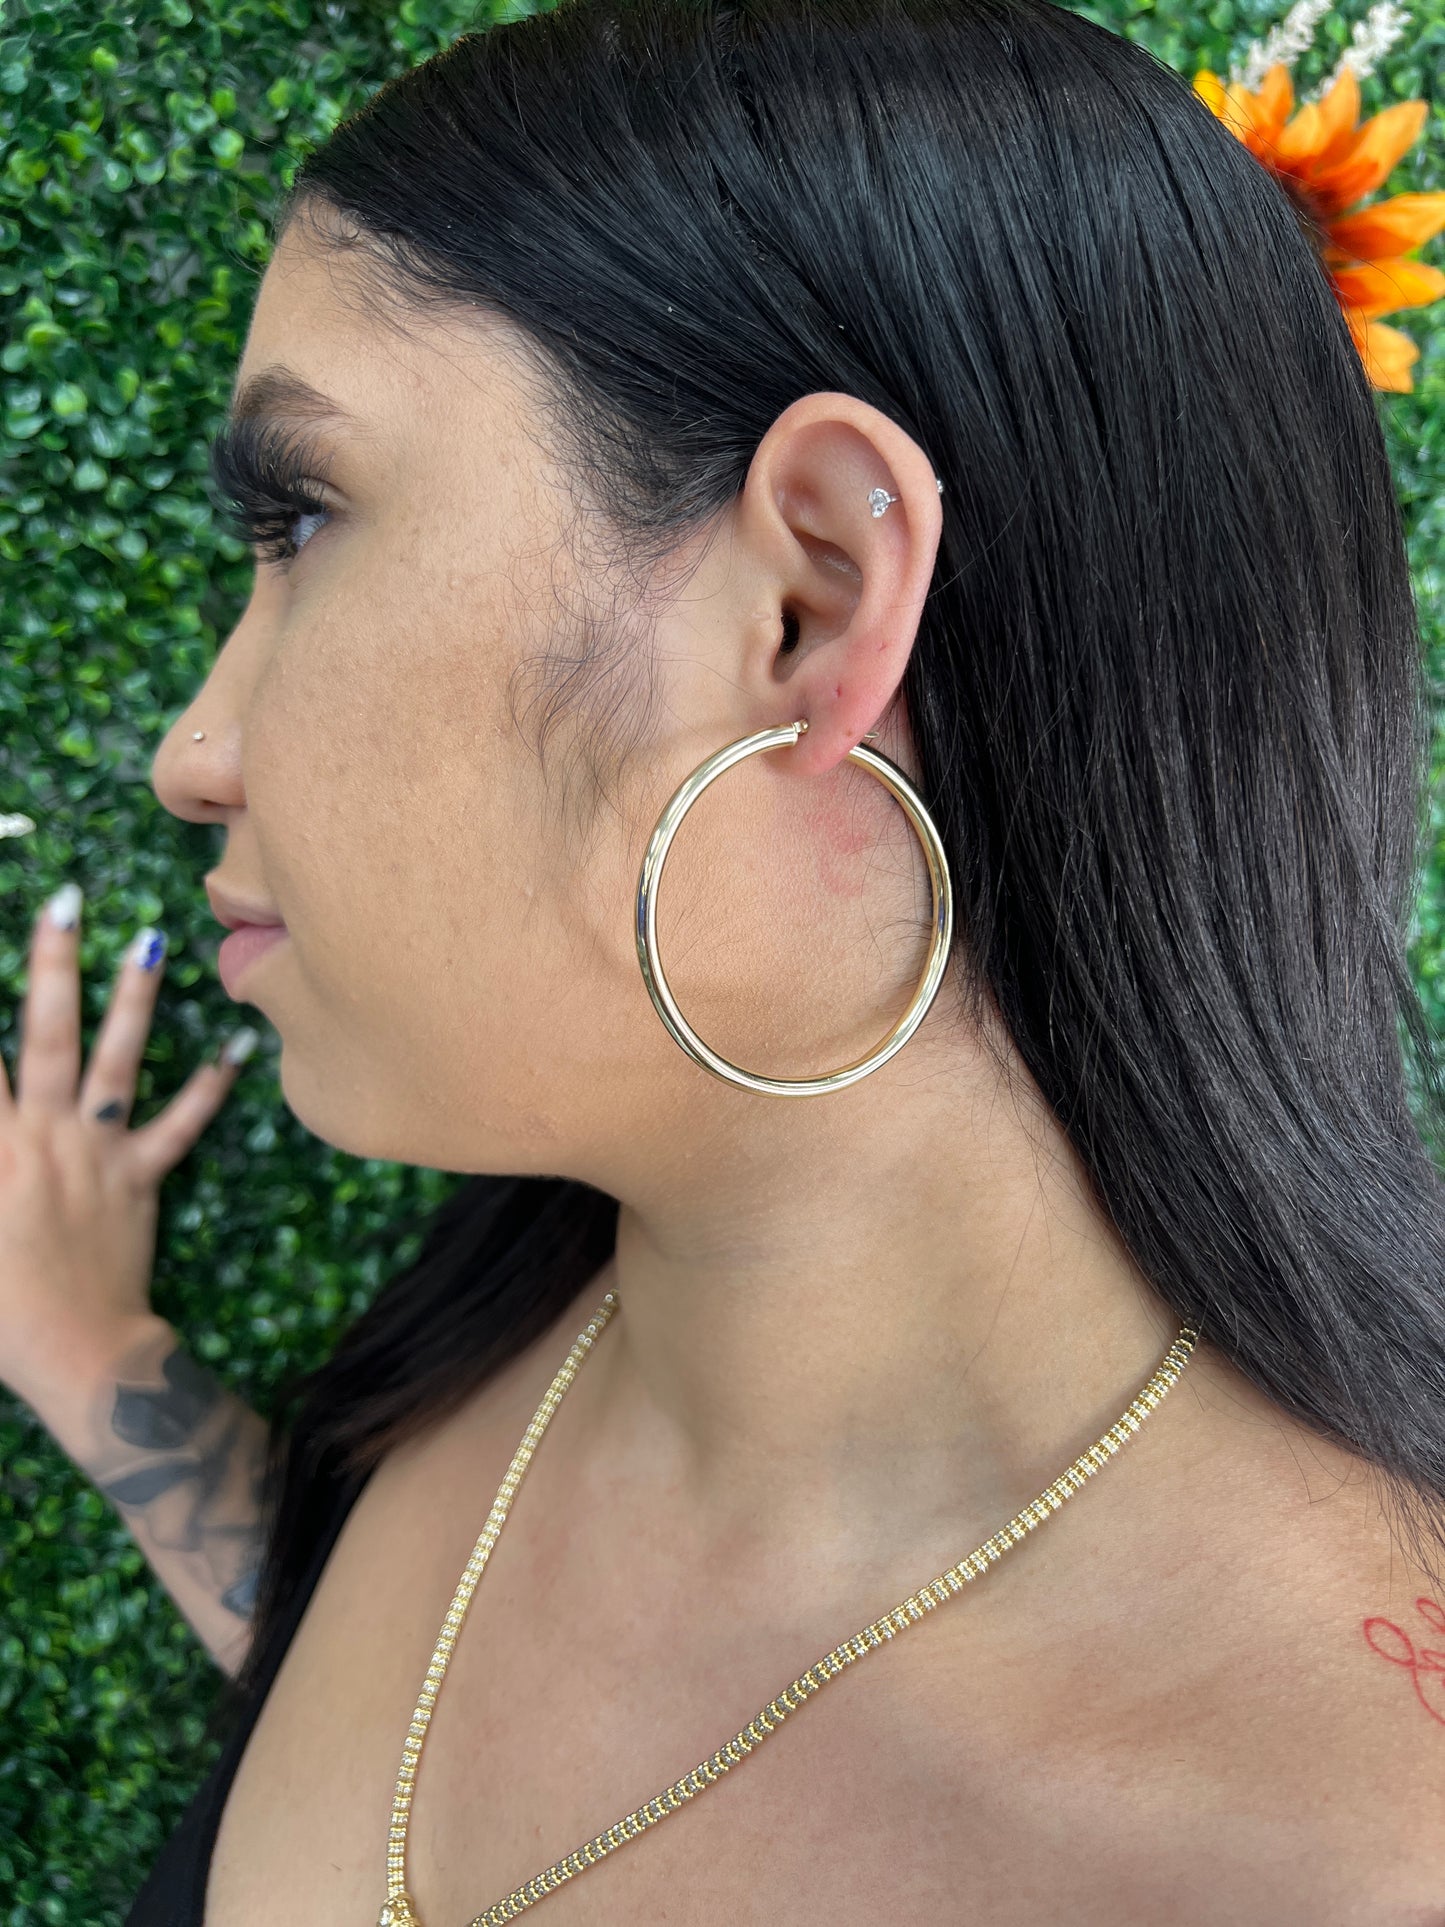 New 🔥 14K Yellow Gold Hoops By GDO